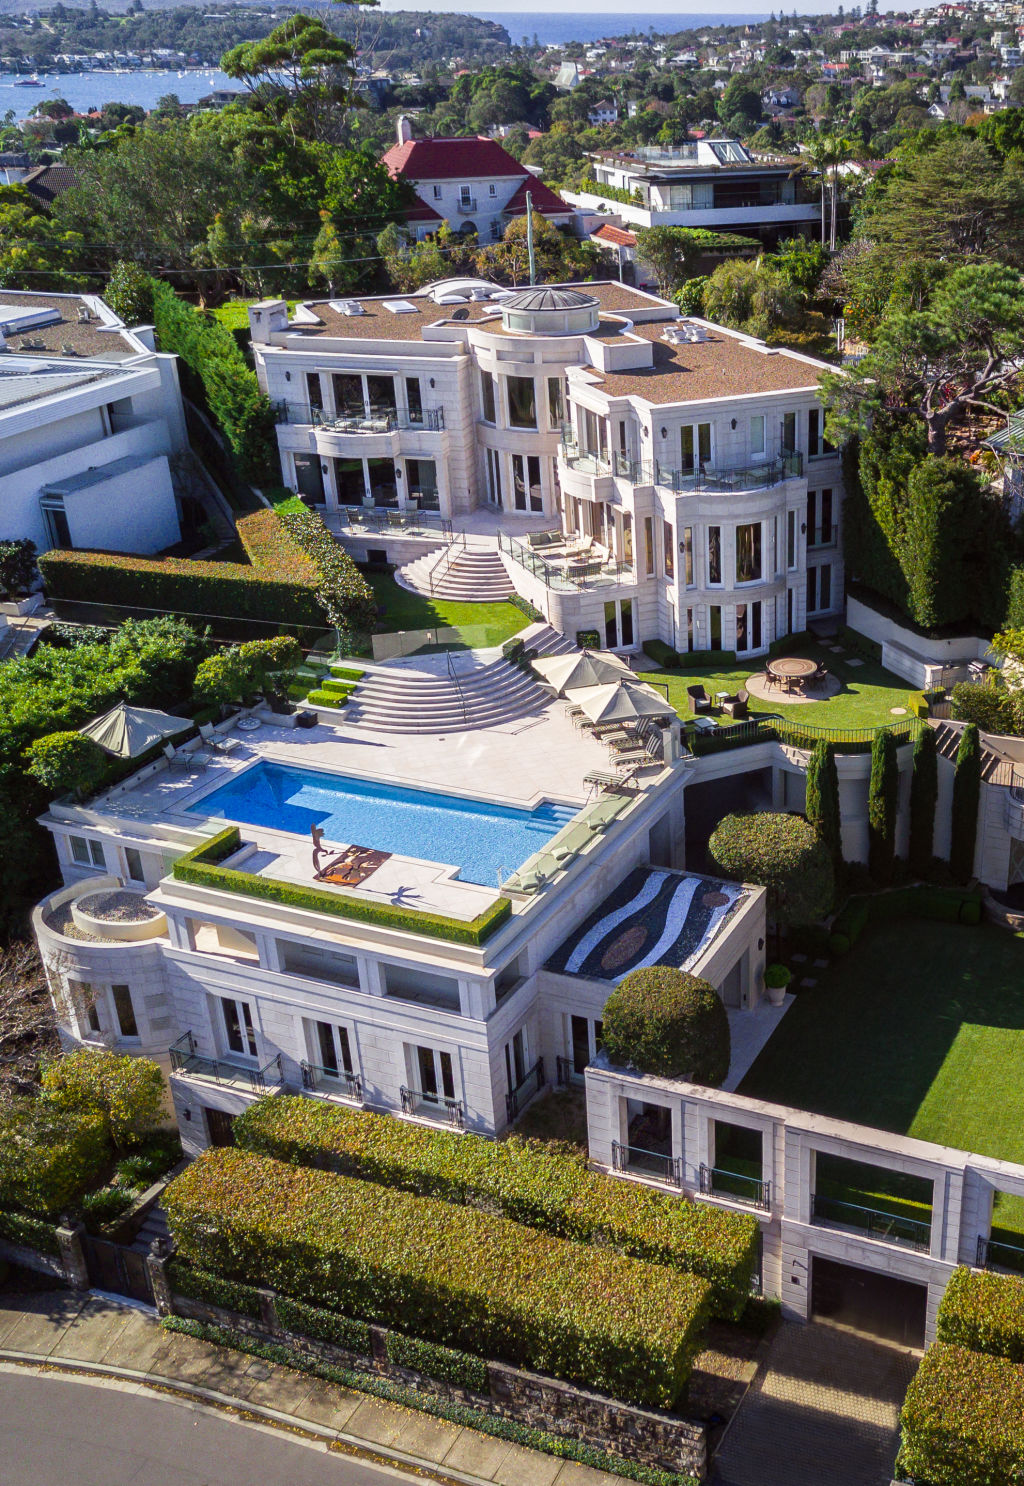 At $60m, this is the most expensive property listed for sale this year in Sydney